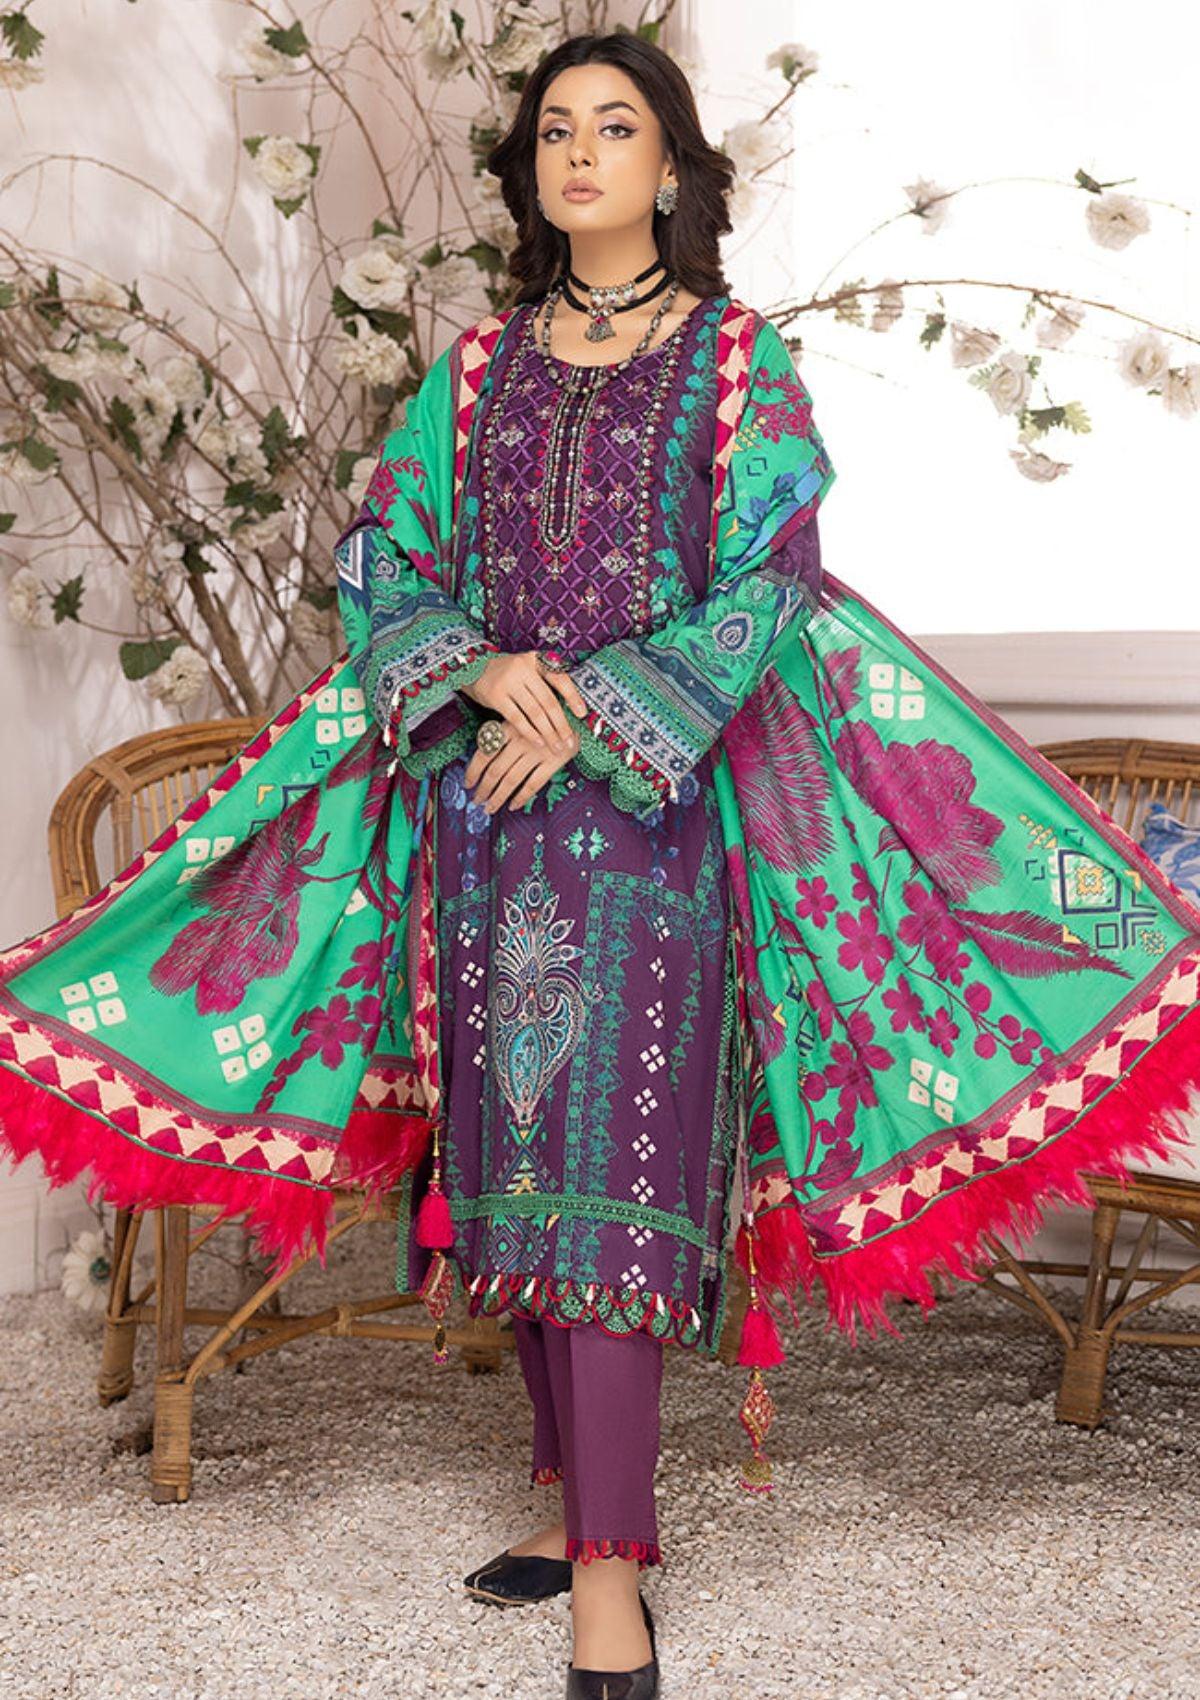 Al-Zohaib-Wintry-Soiree-Khaddar--winter-Embroidered-&-Printed-Dress-is-available-at-Mohsin-Saeed-Fabrics-Online-Shopping--